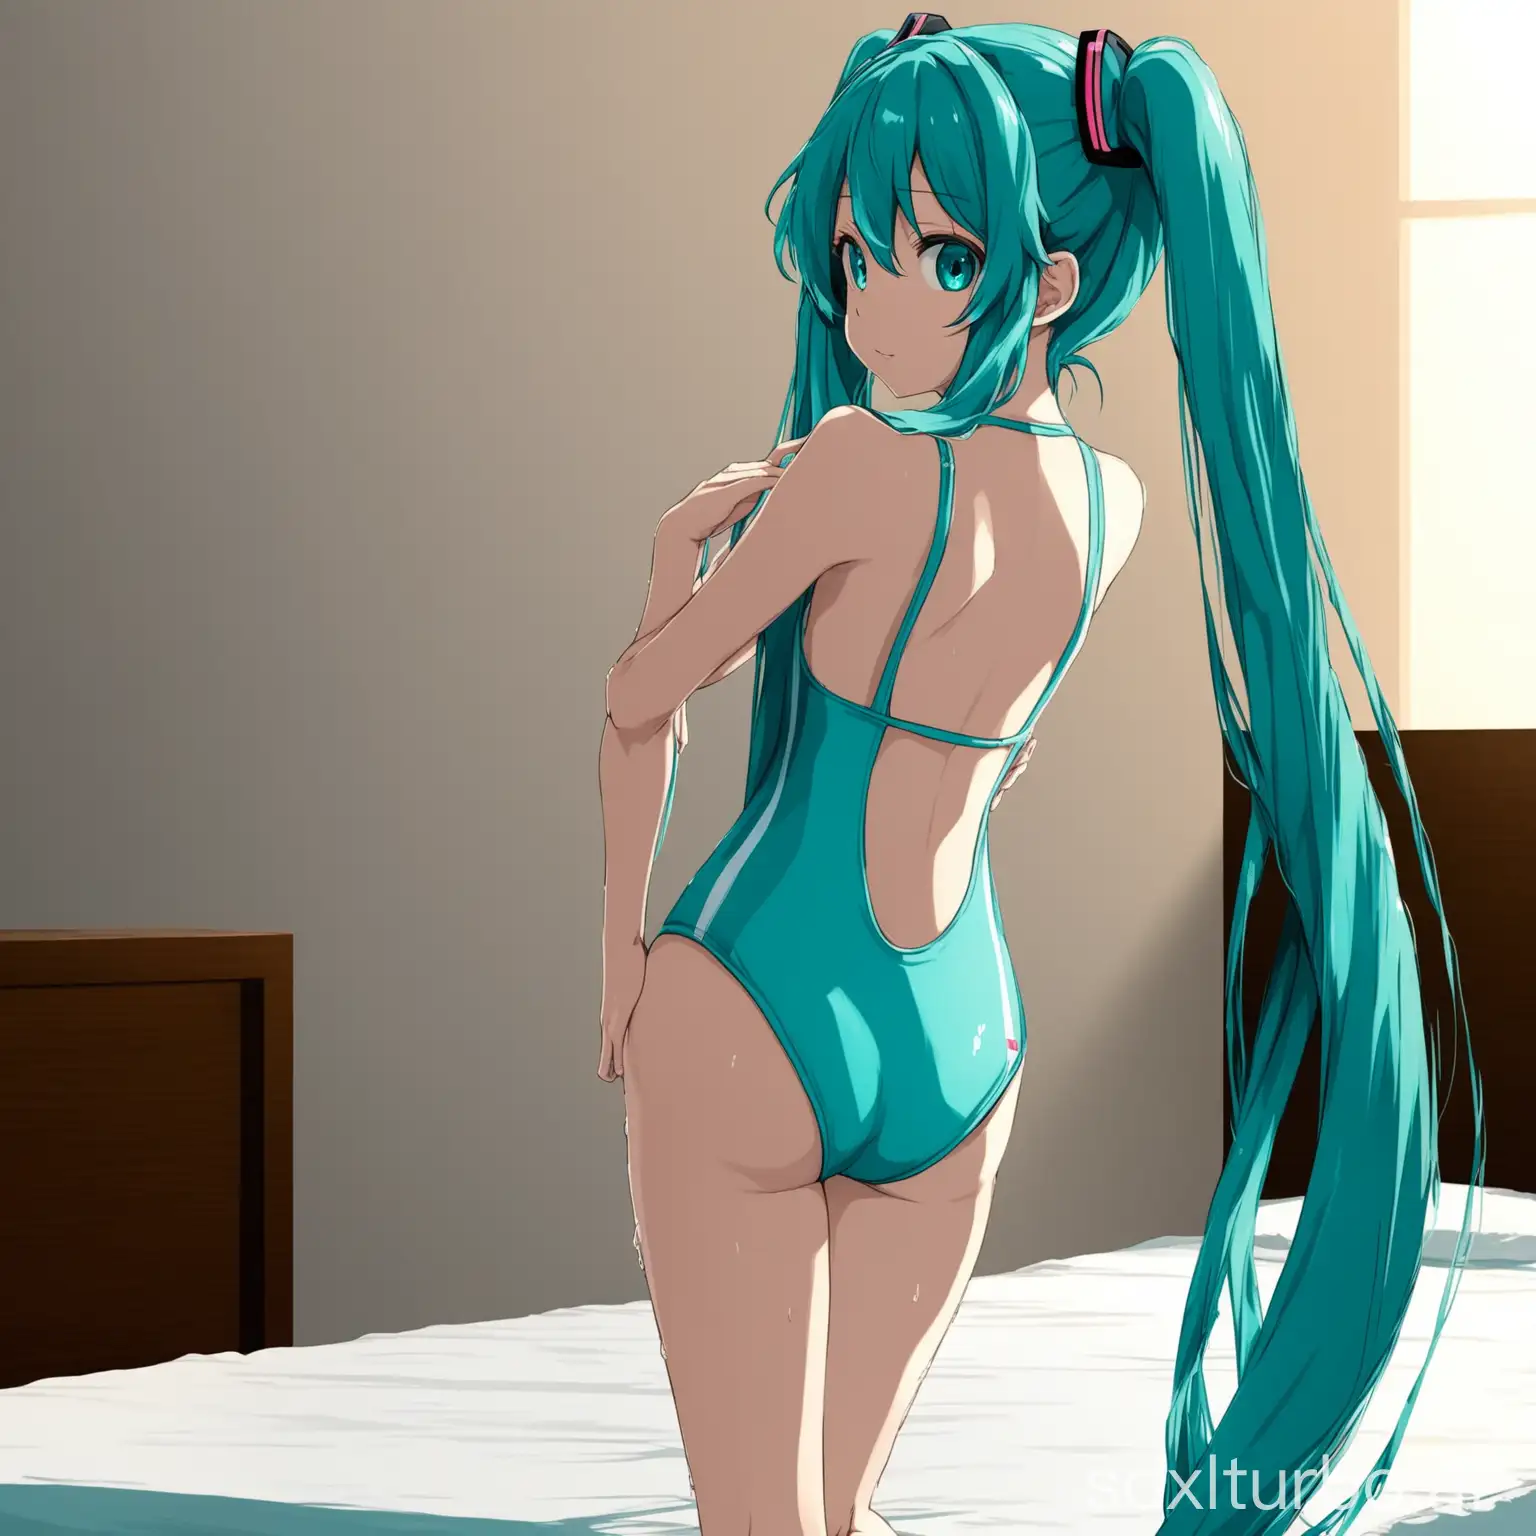 Hatsune-Miku-Swimsuit-Pose-Playful-Lean-on-Bed